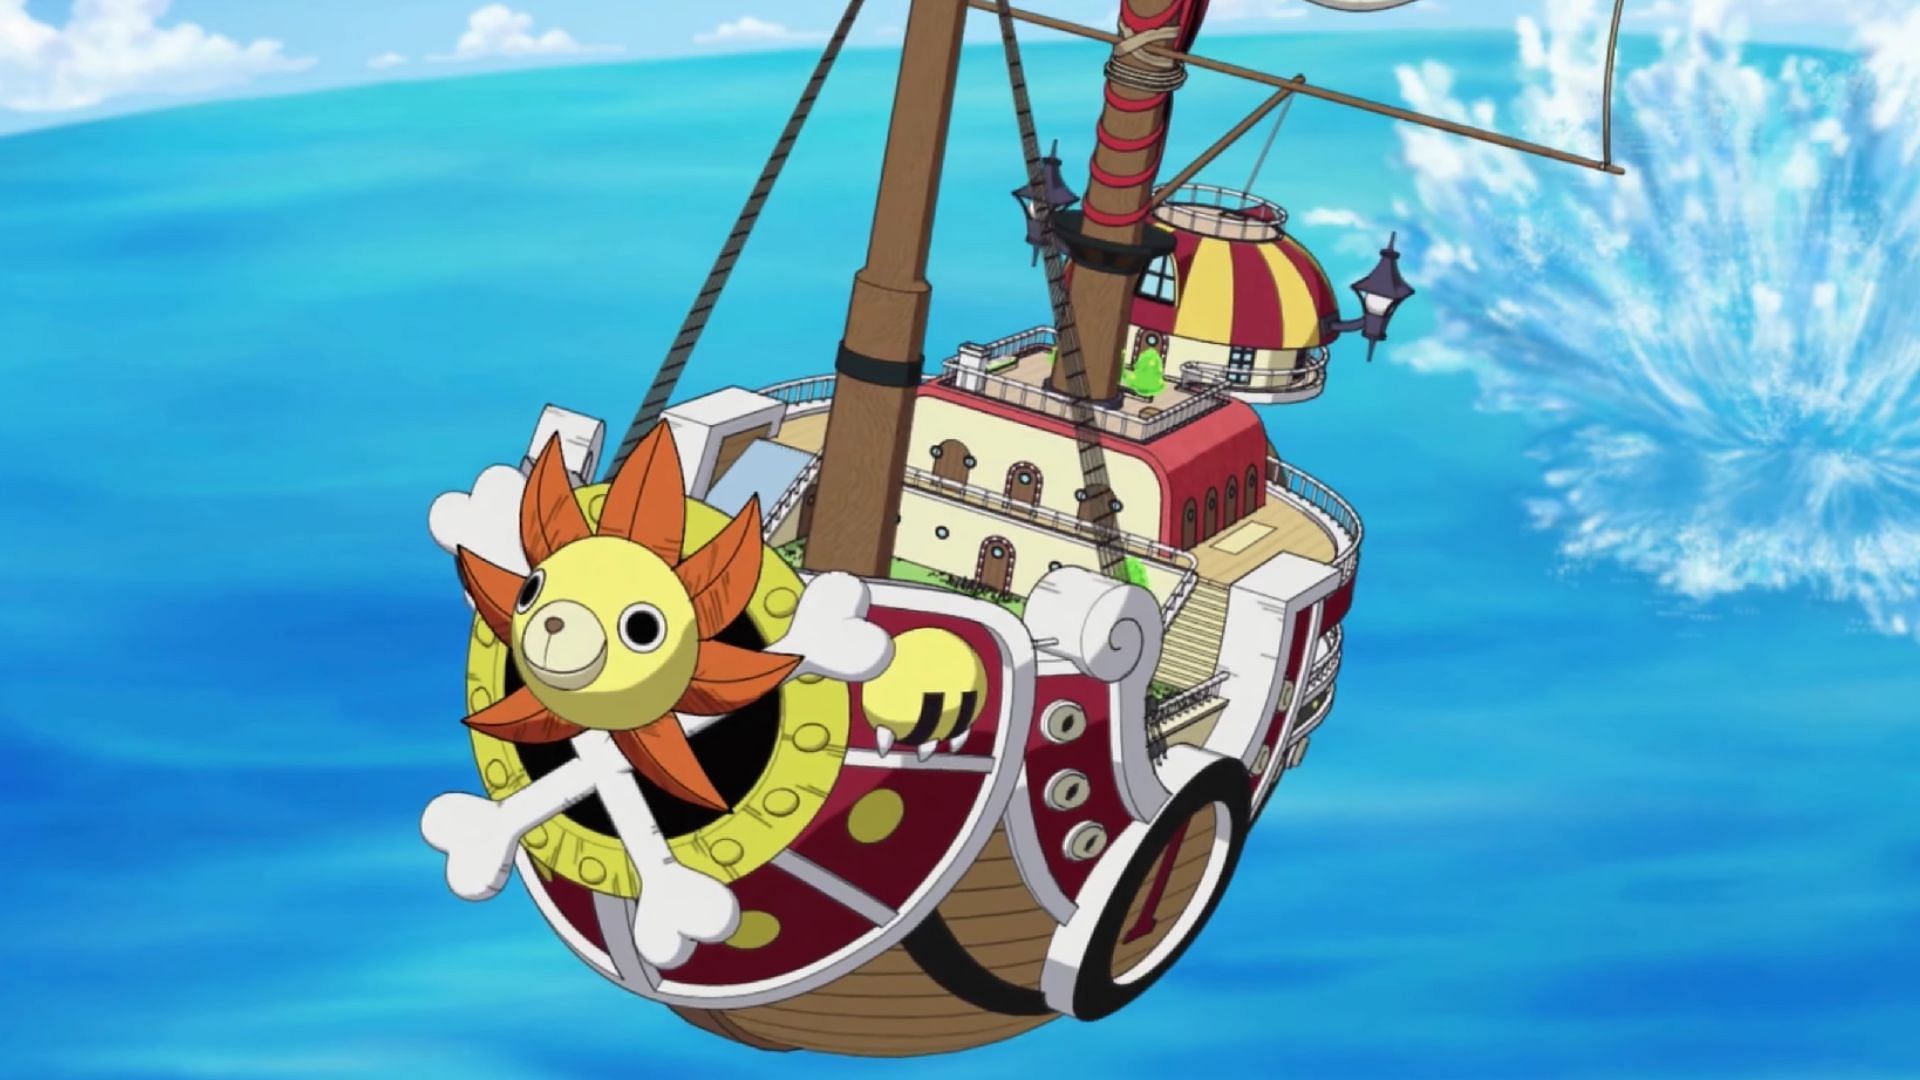 The Thousand Sunny as seen in the One Piece anime (Image via Toei Animation)